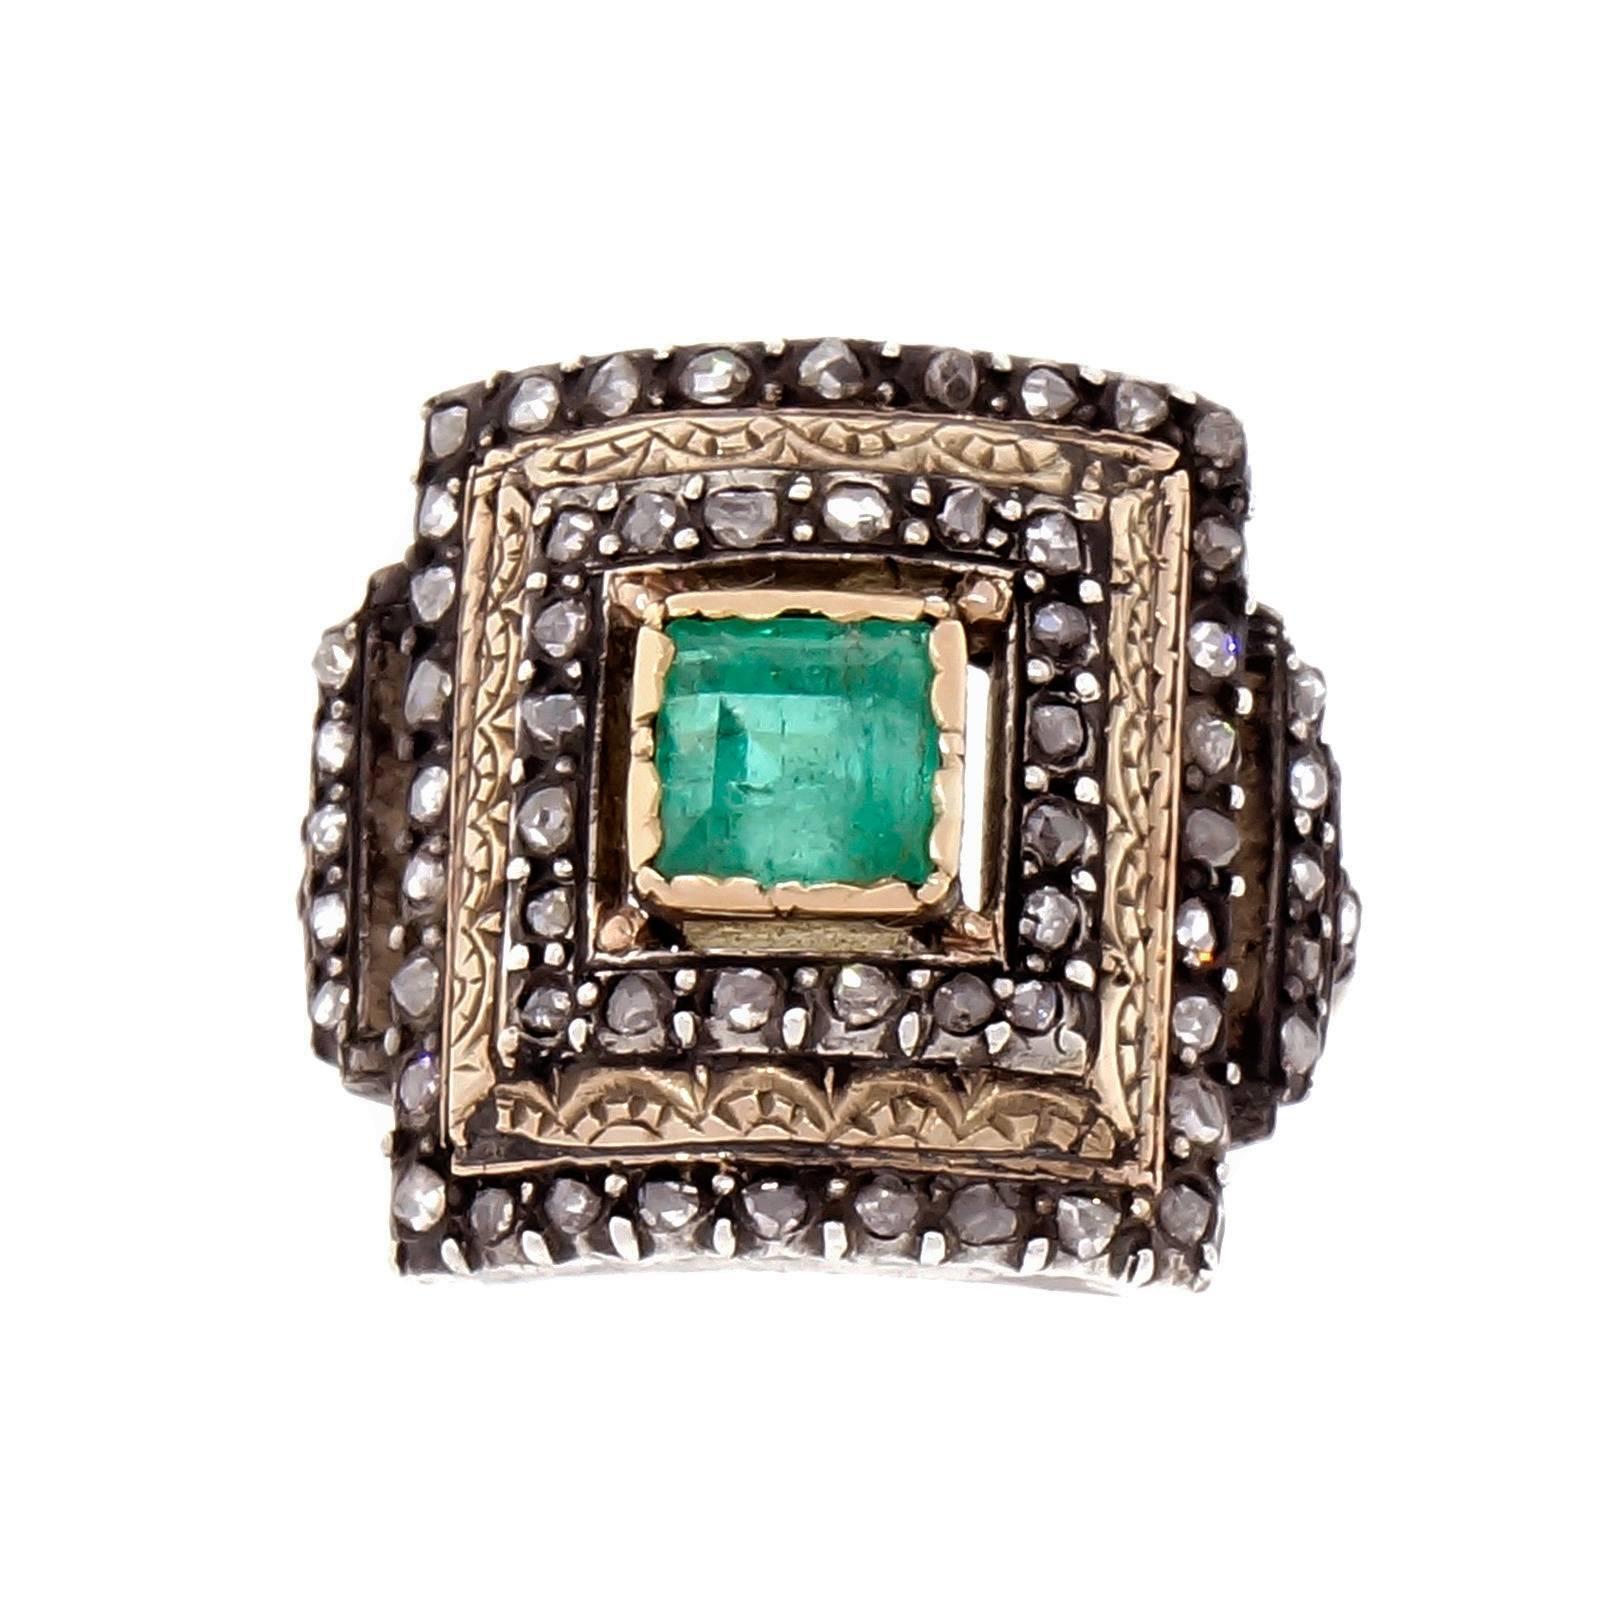 Mid 1800’s Victorian 14k rose gold and silver all original ring with rose cut diamonds and a beautiful natural step cut Emerald with minor clarity enhancement.

1 octagonal step cut green Emerald, approx. total weight .70cts, 5.50 x 5.44 x 5.60mm,